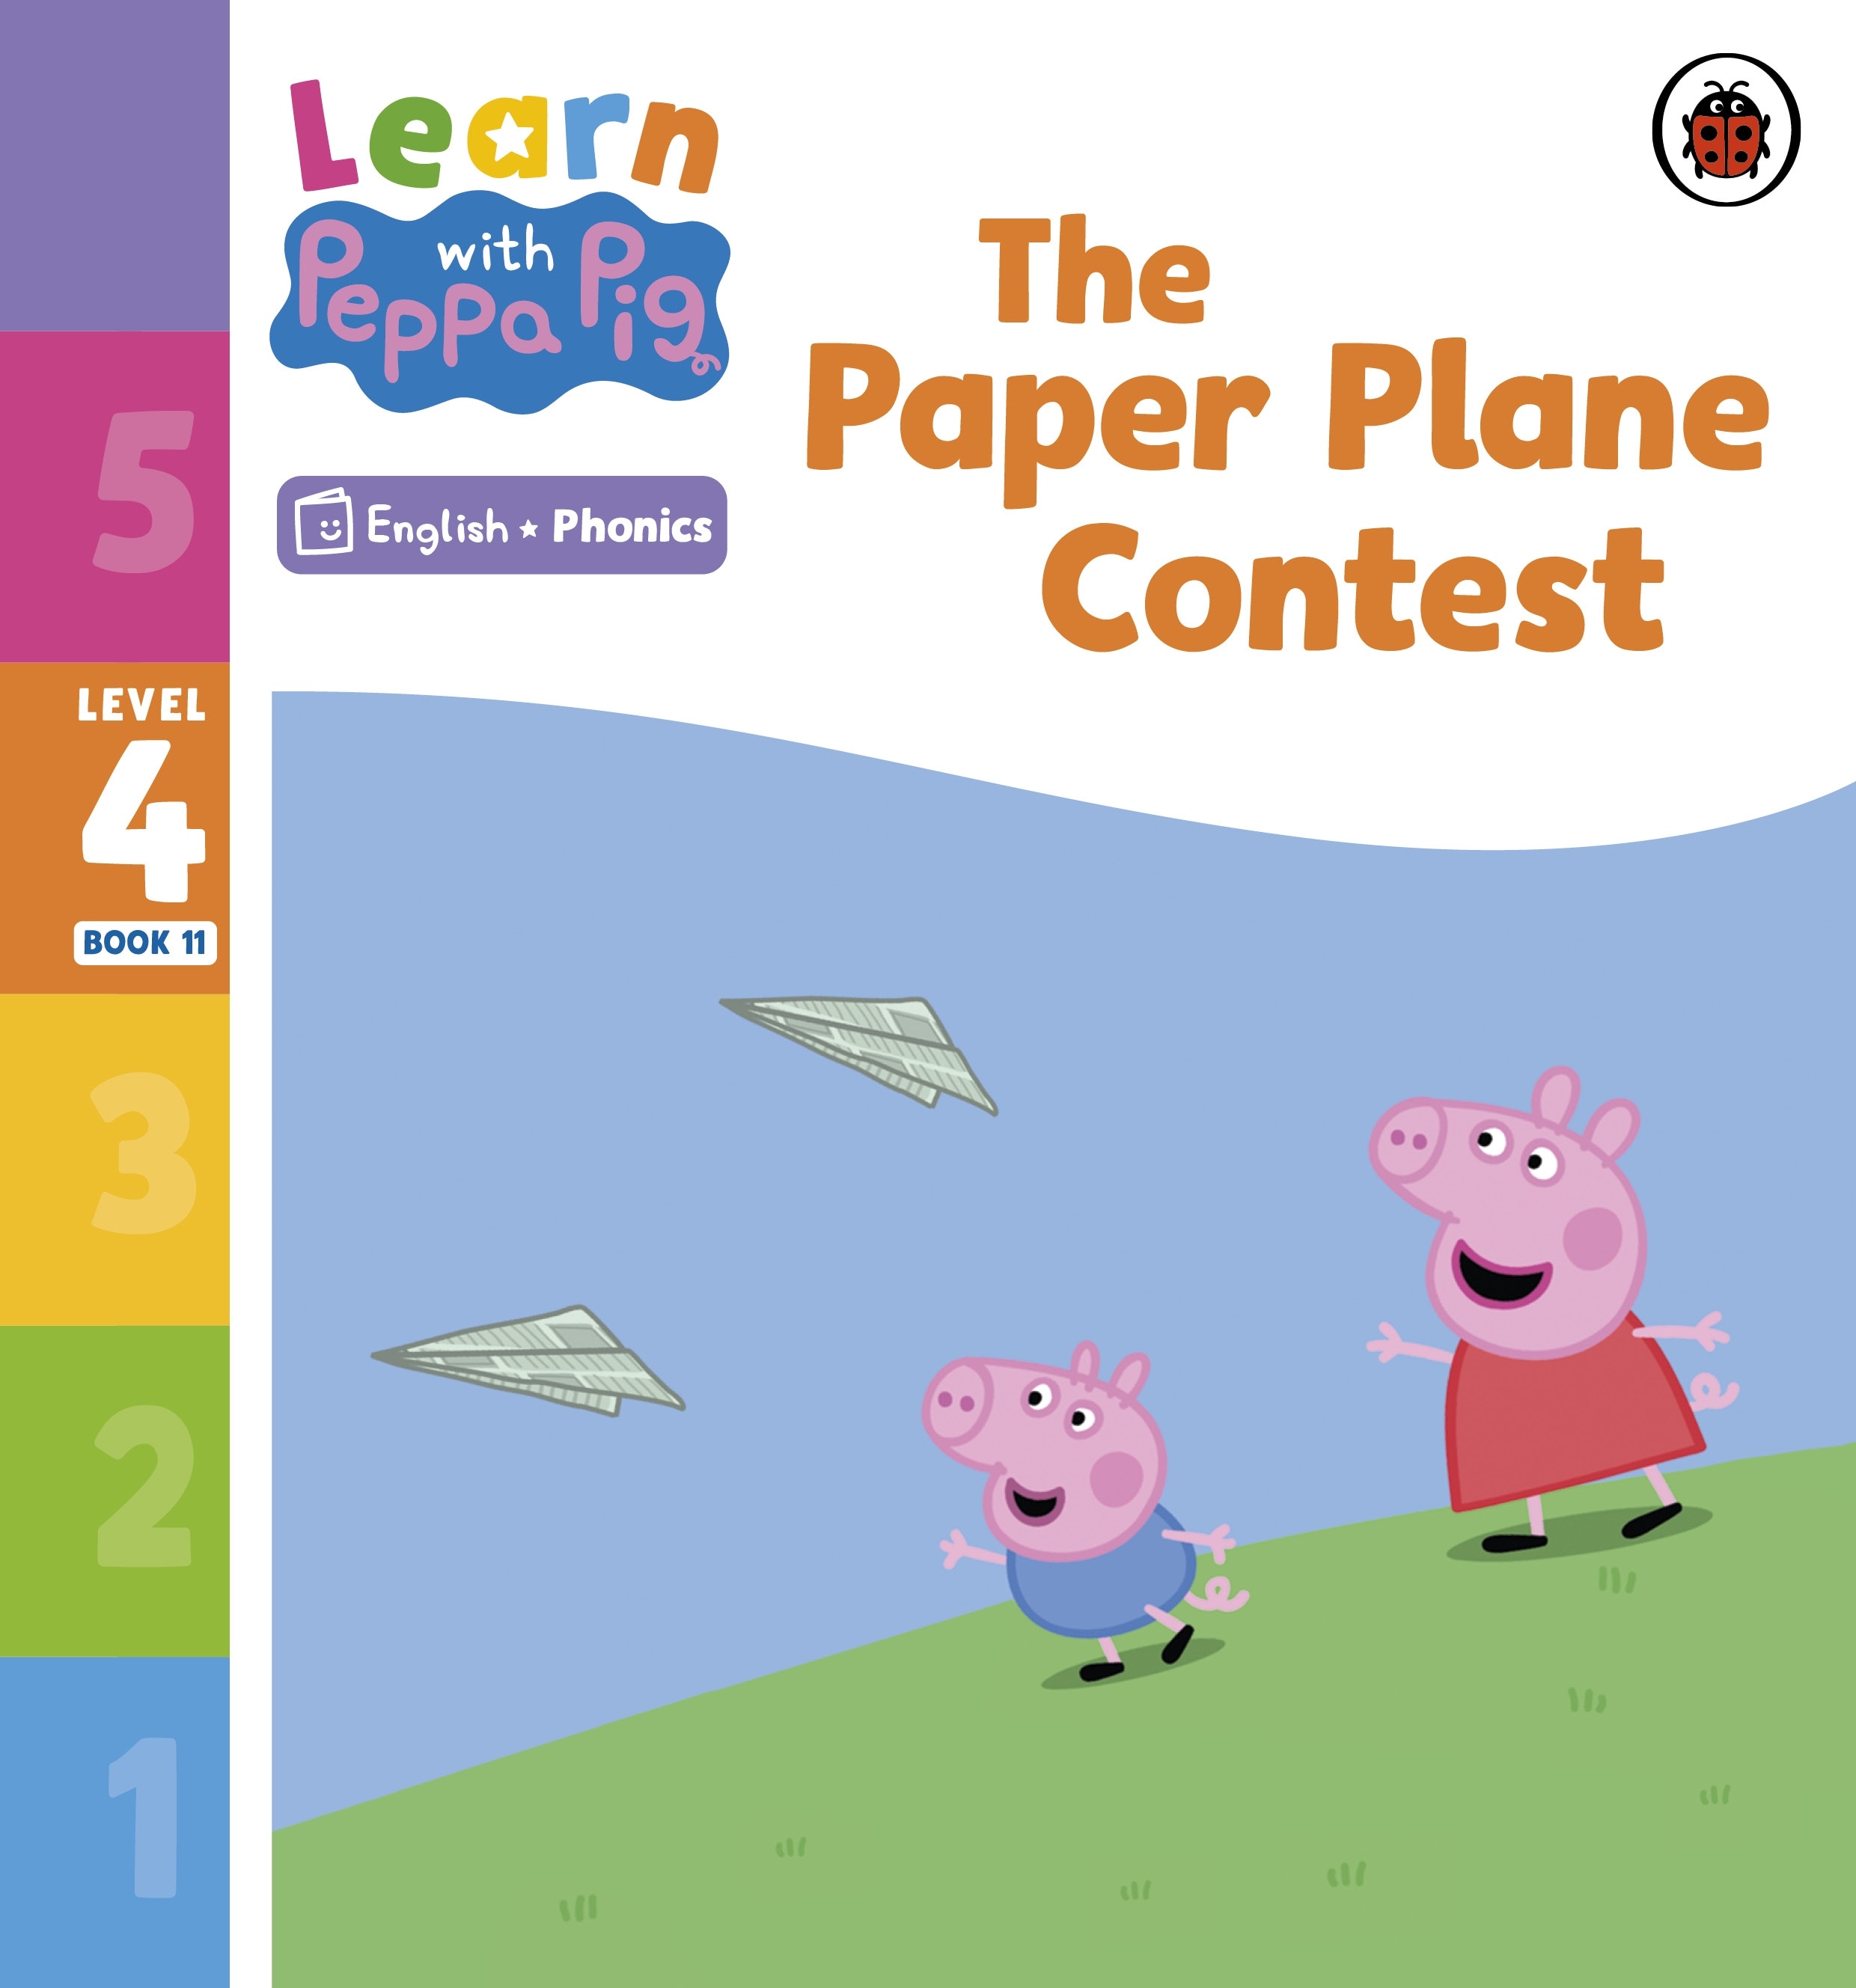 Learn with Peppa Phonics Level 4 Book 11 — The Paper Plane Contest (Phonics Reader)